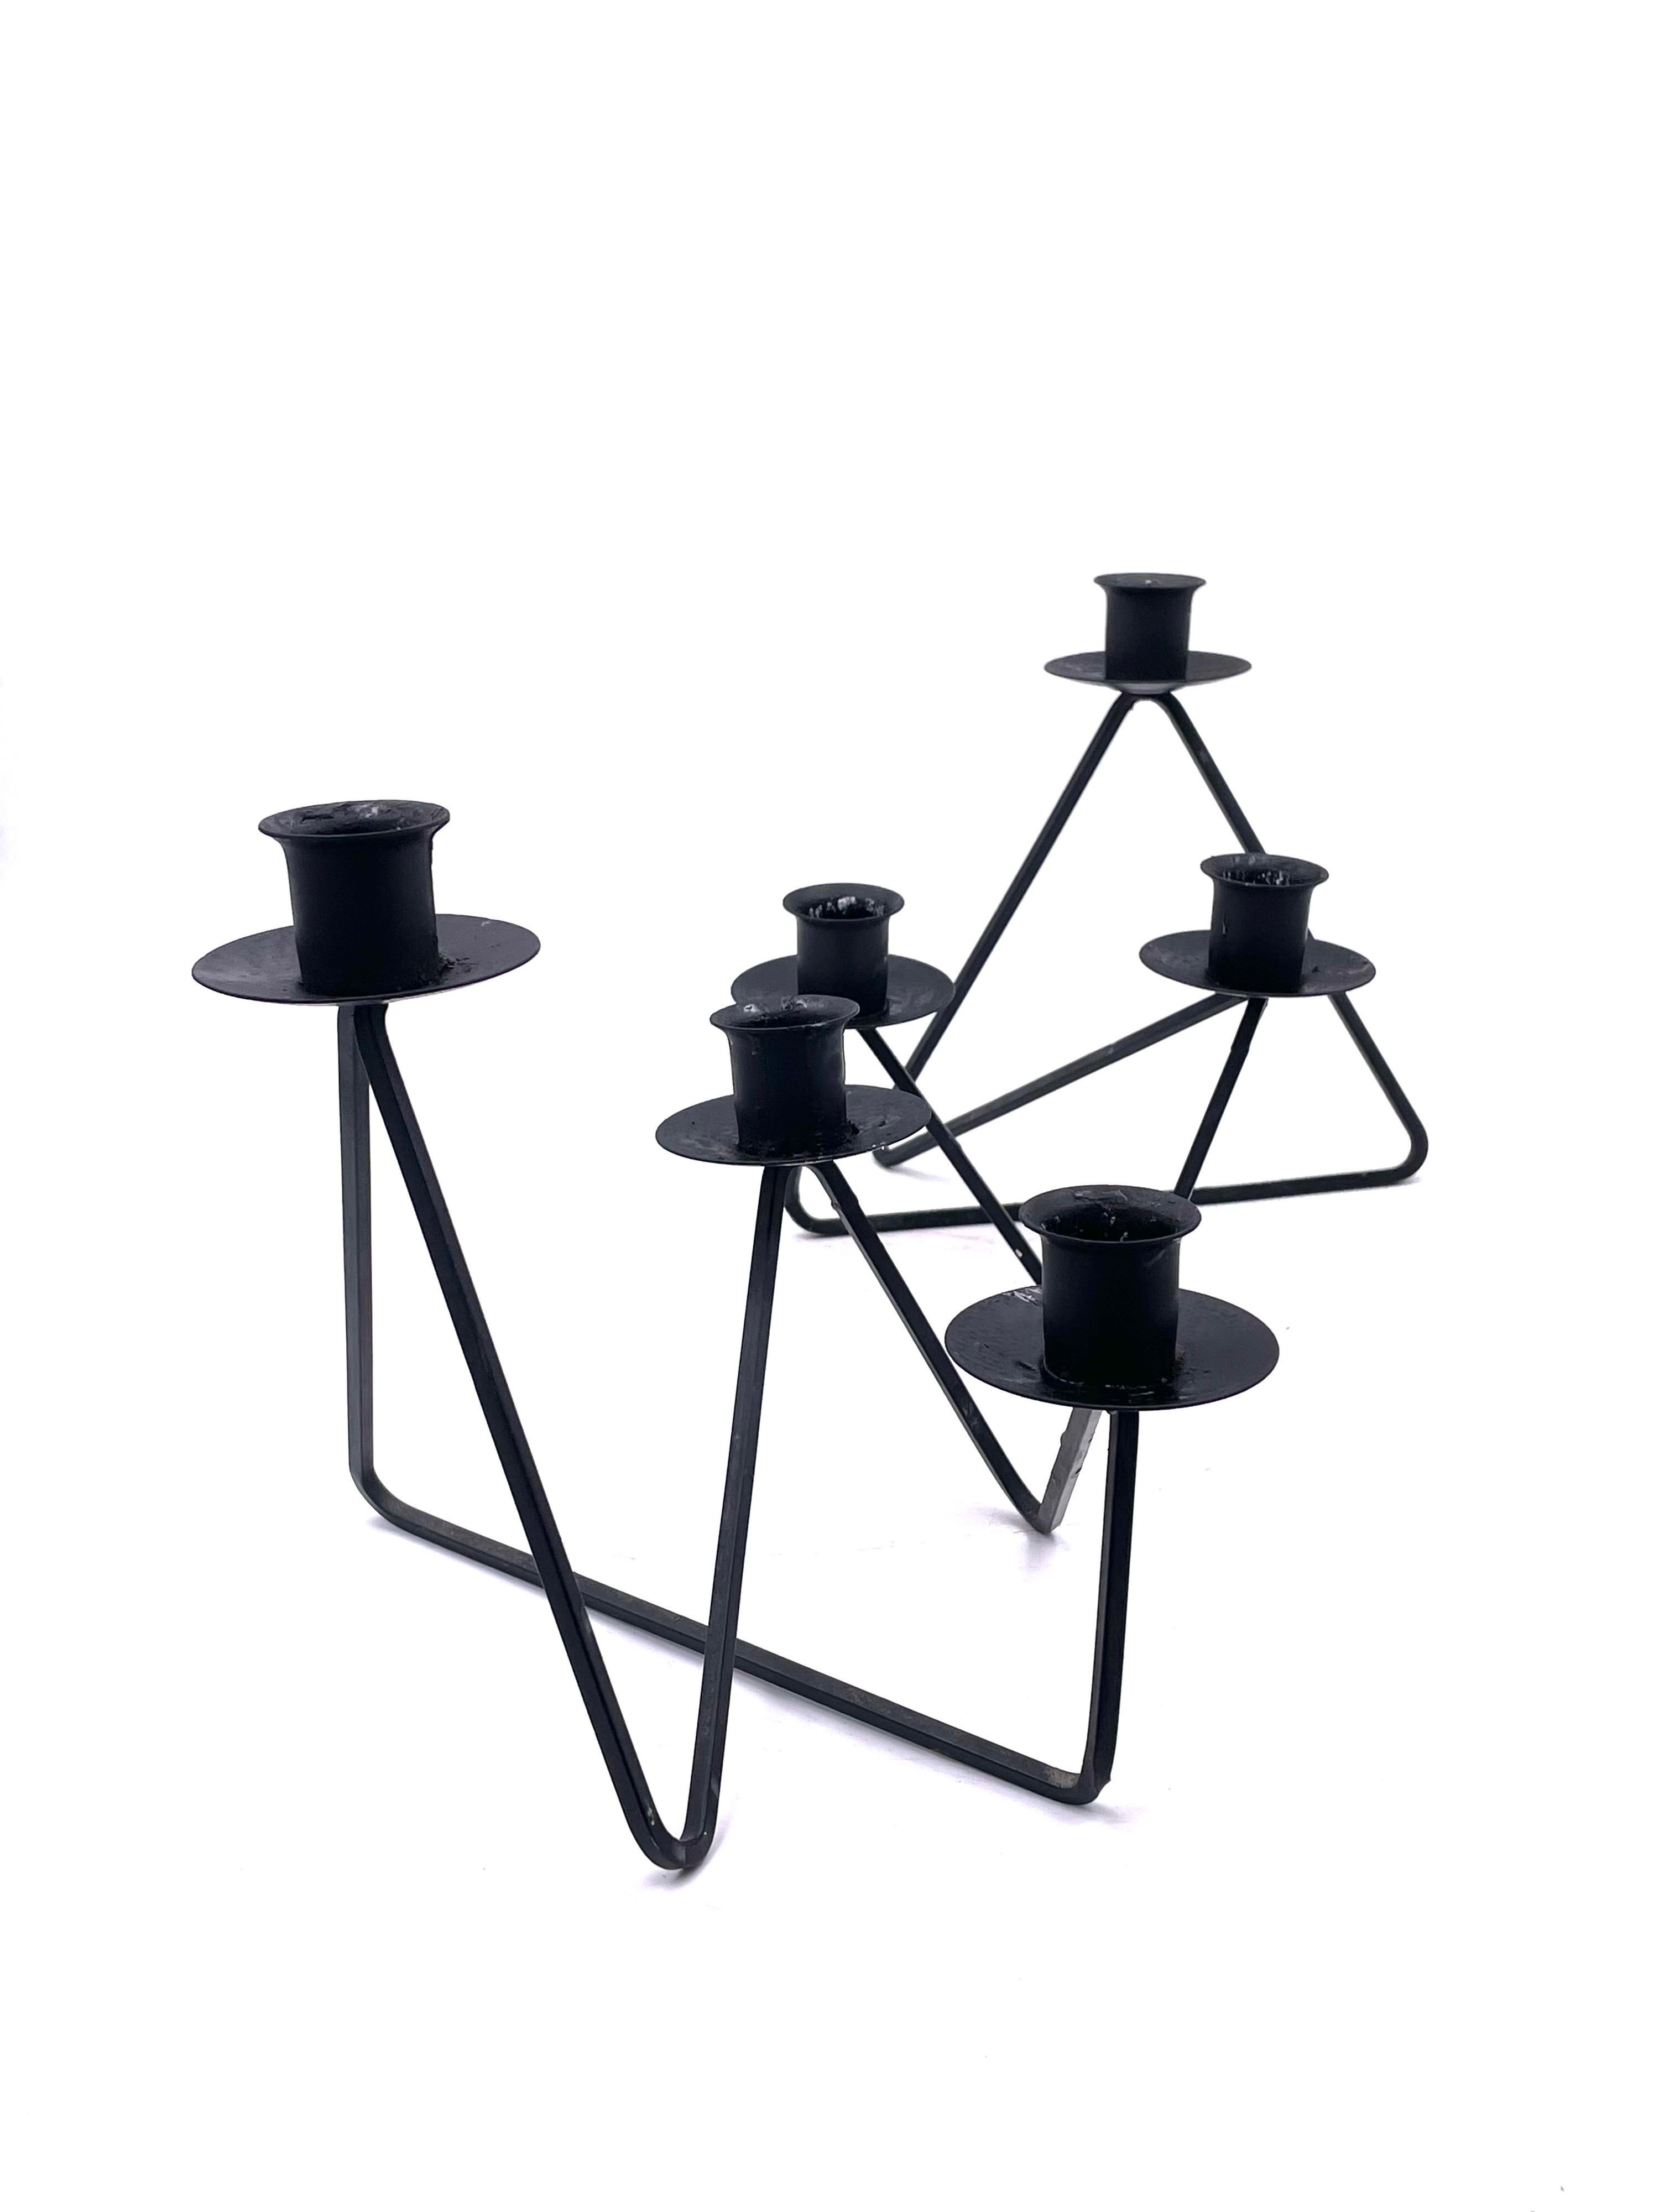 Great simple design on these pair of atomic age welded black enameled metal, striking design circa 1950's.